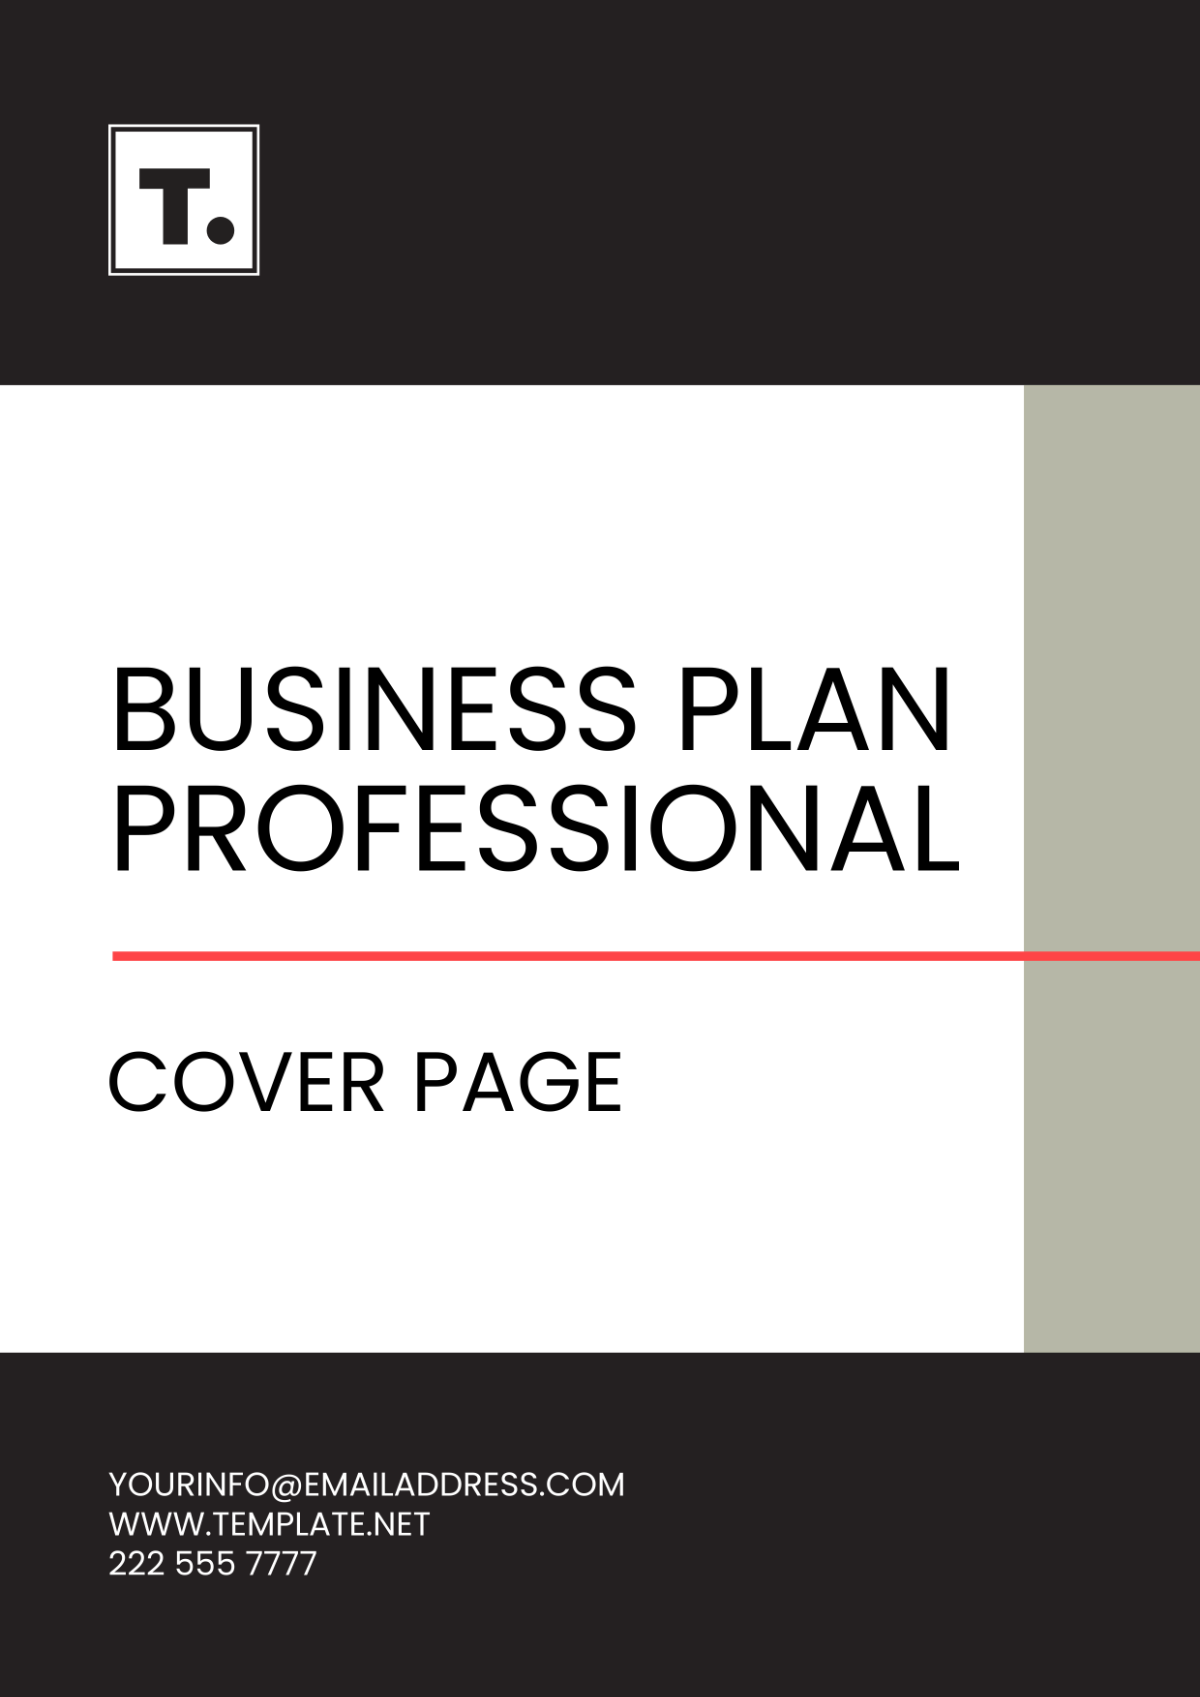 Business Plan Professional Cover Page